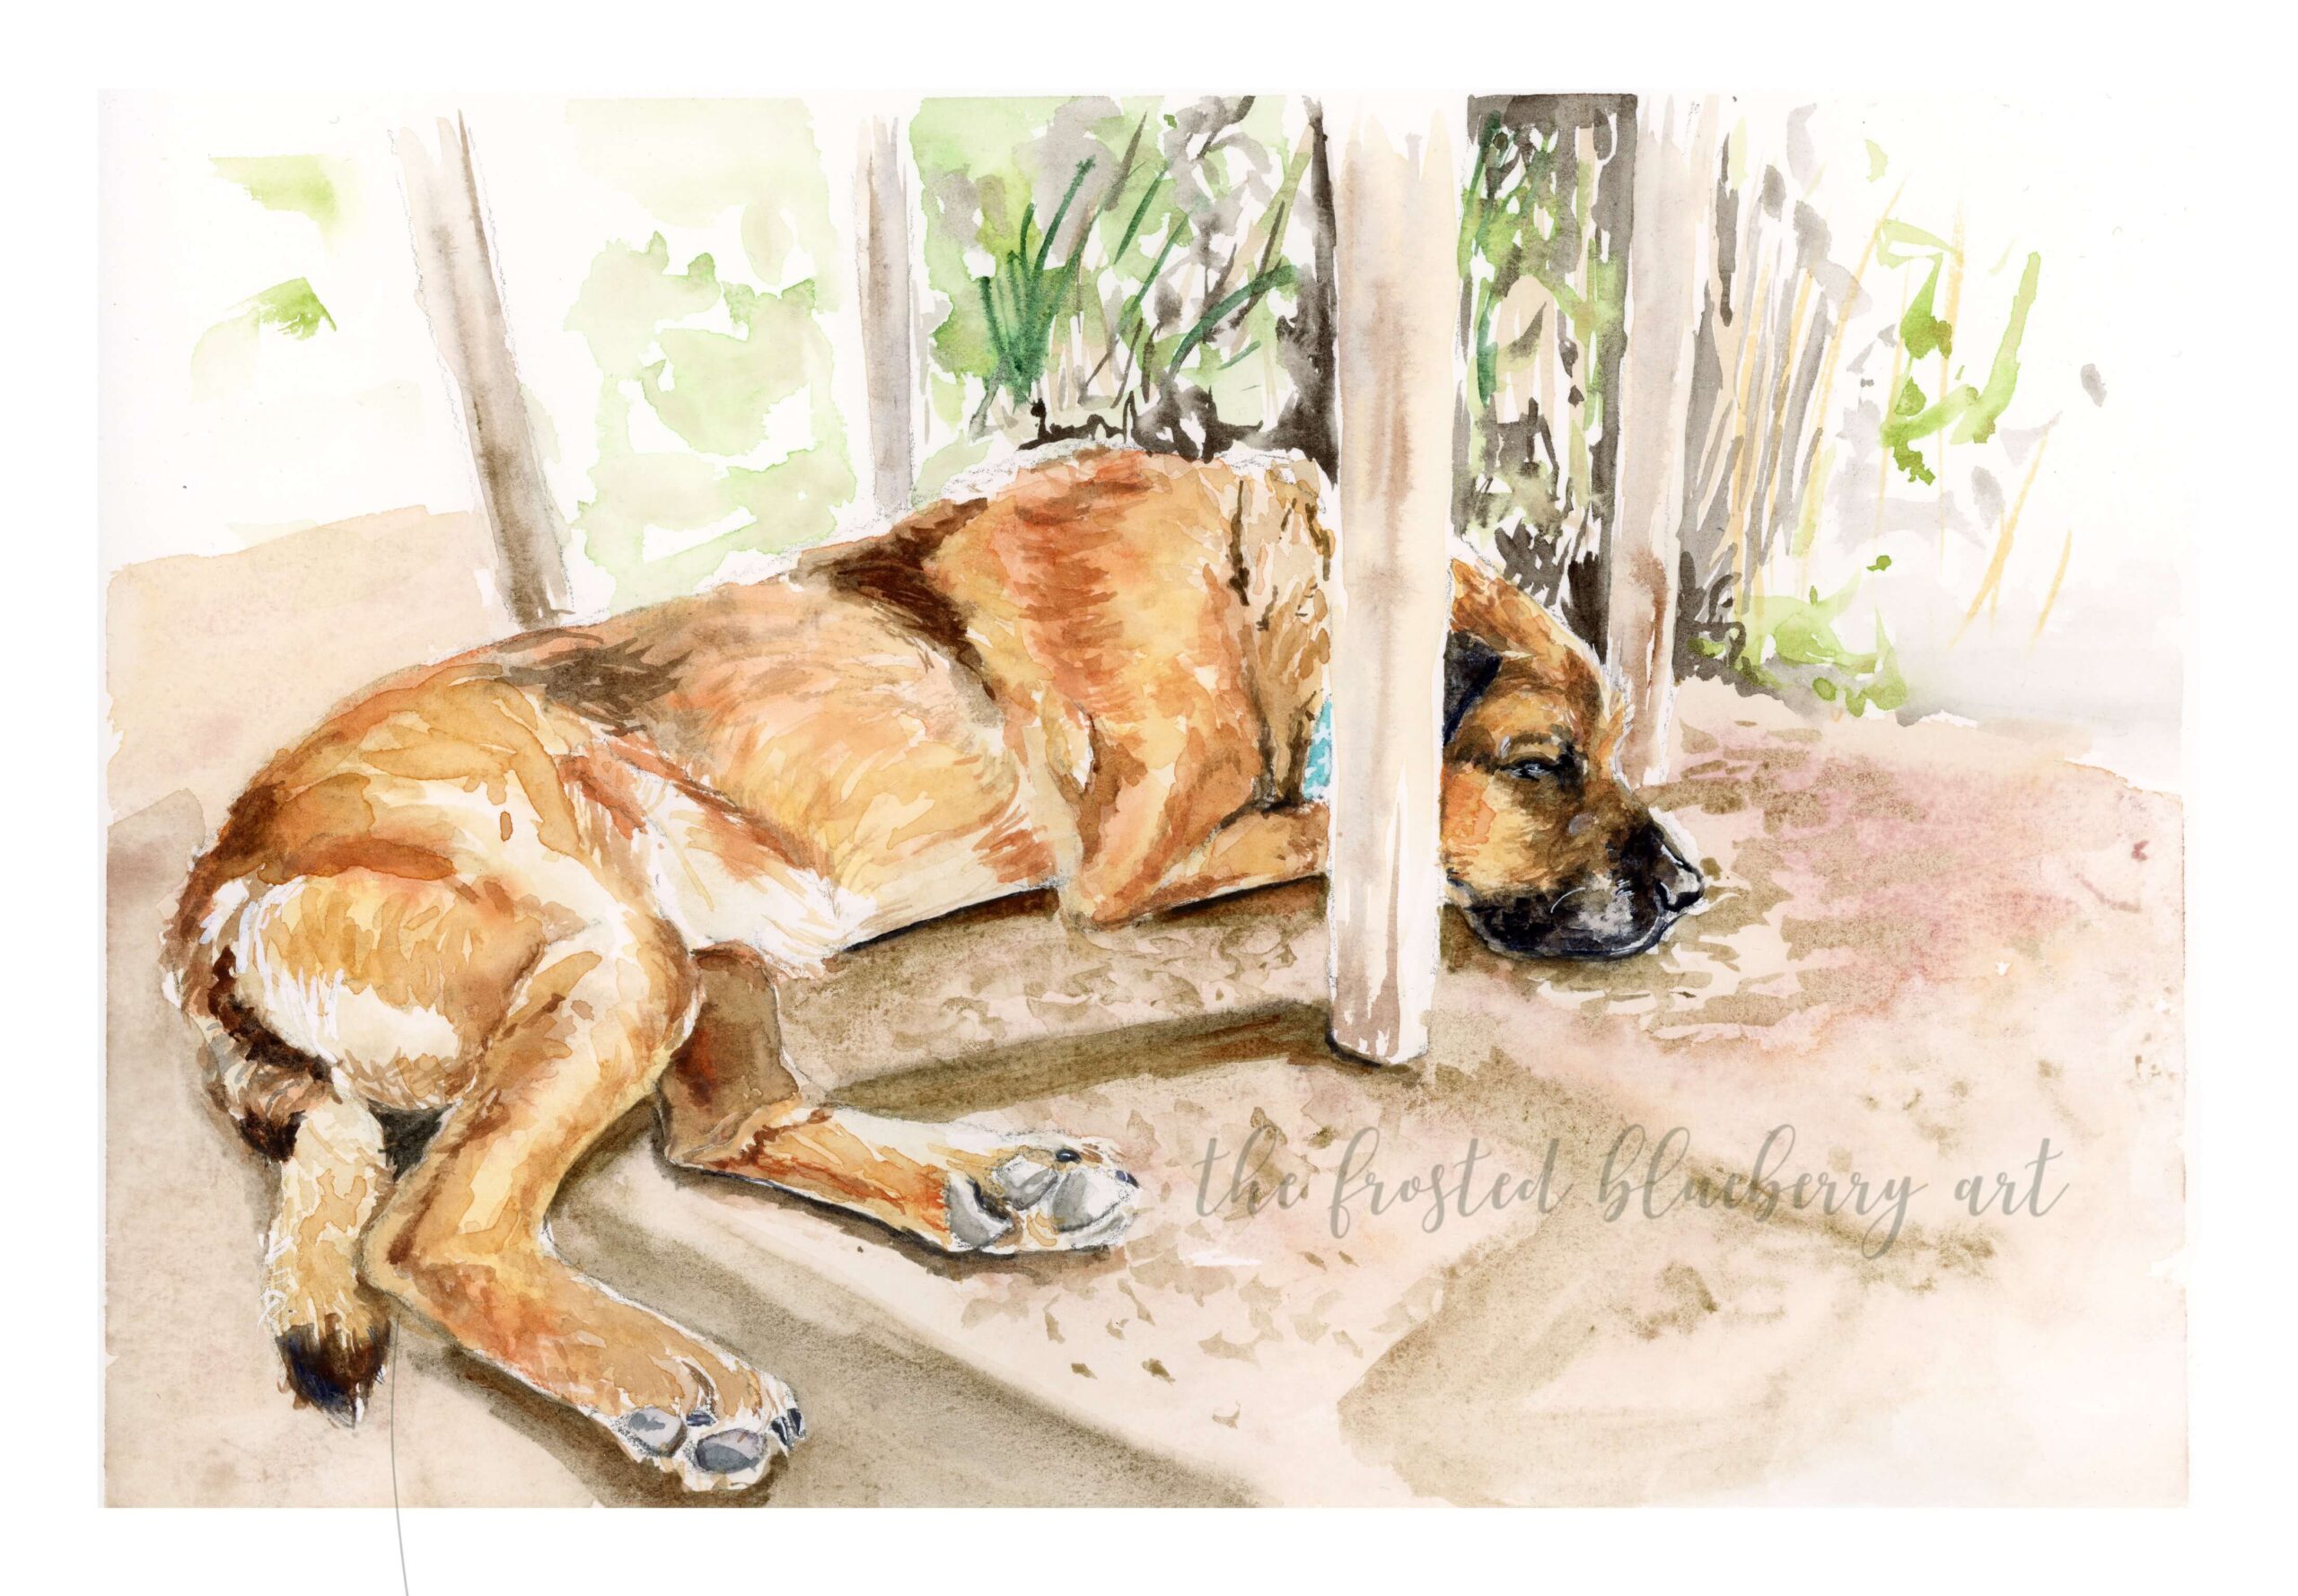 Watercolour painting of a large golden brown dog asleep in the sun under a table outdoors.